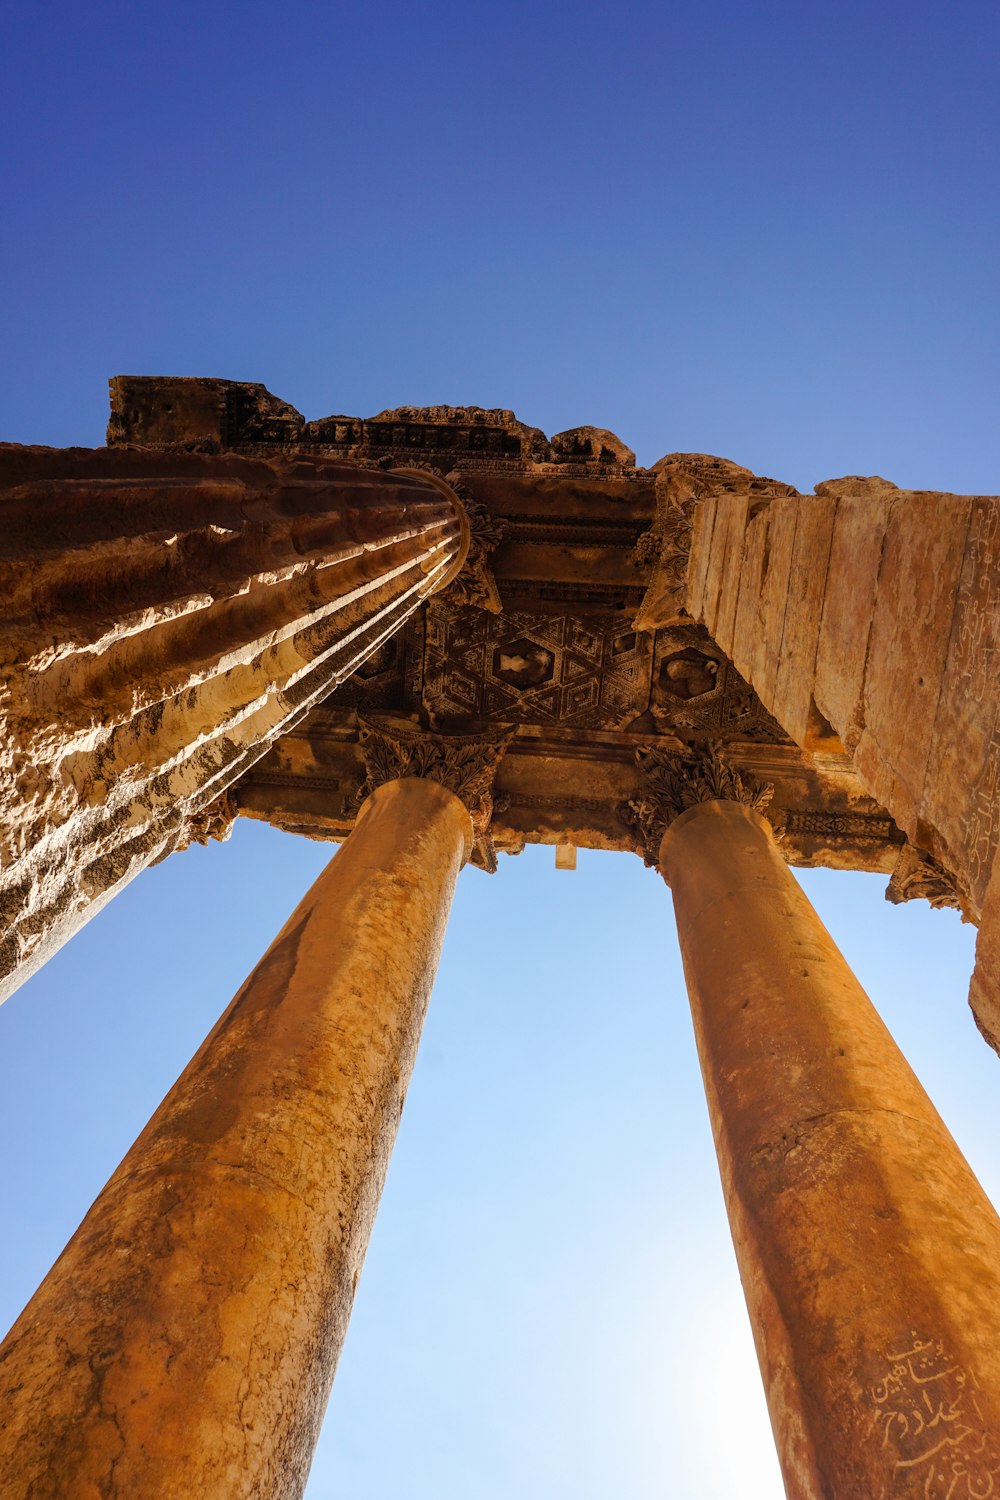 looking up at the pillars of a roman temple